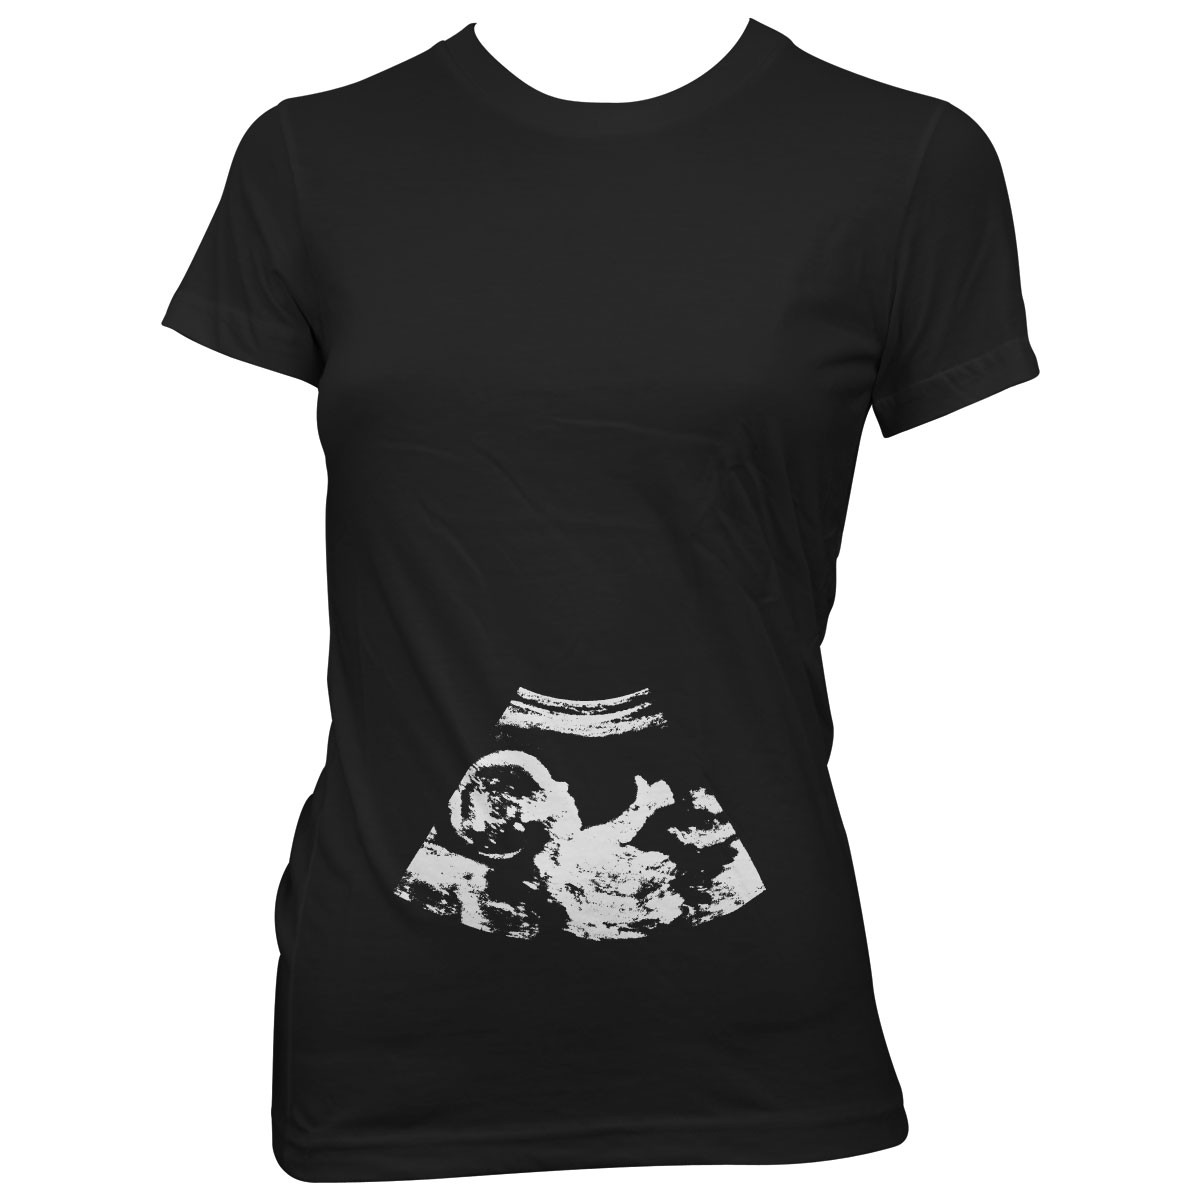 Thumbs Up Baby Scan Maternity T-Shirt